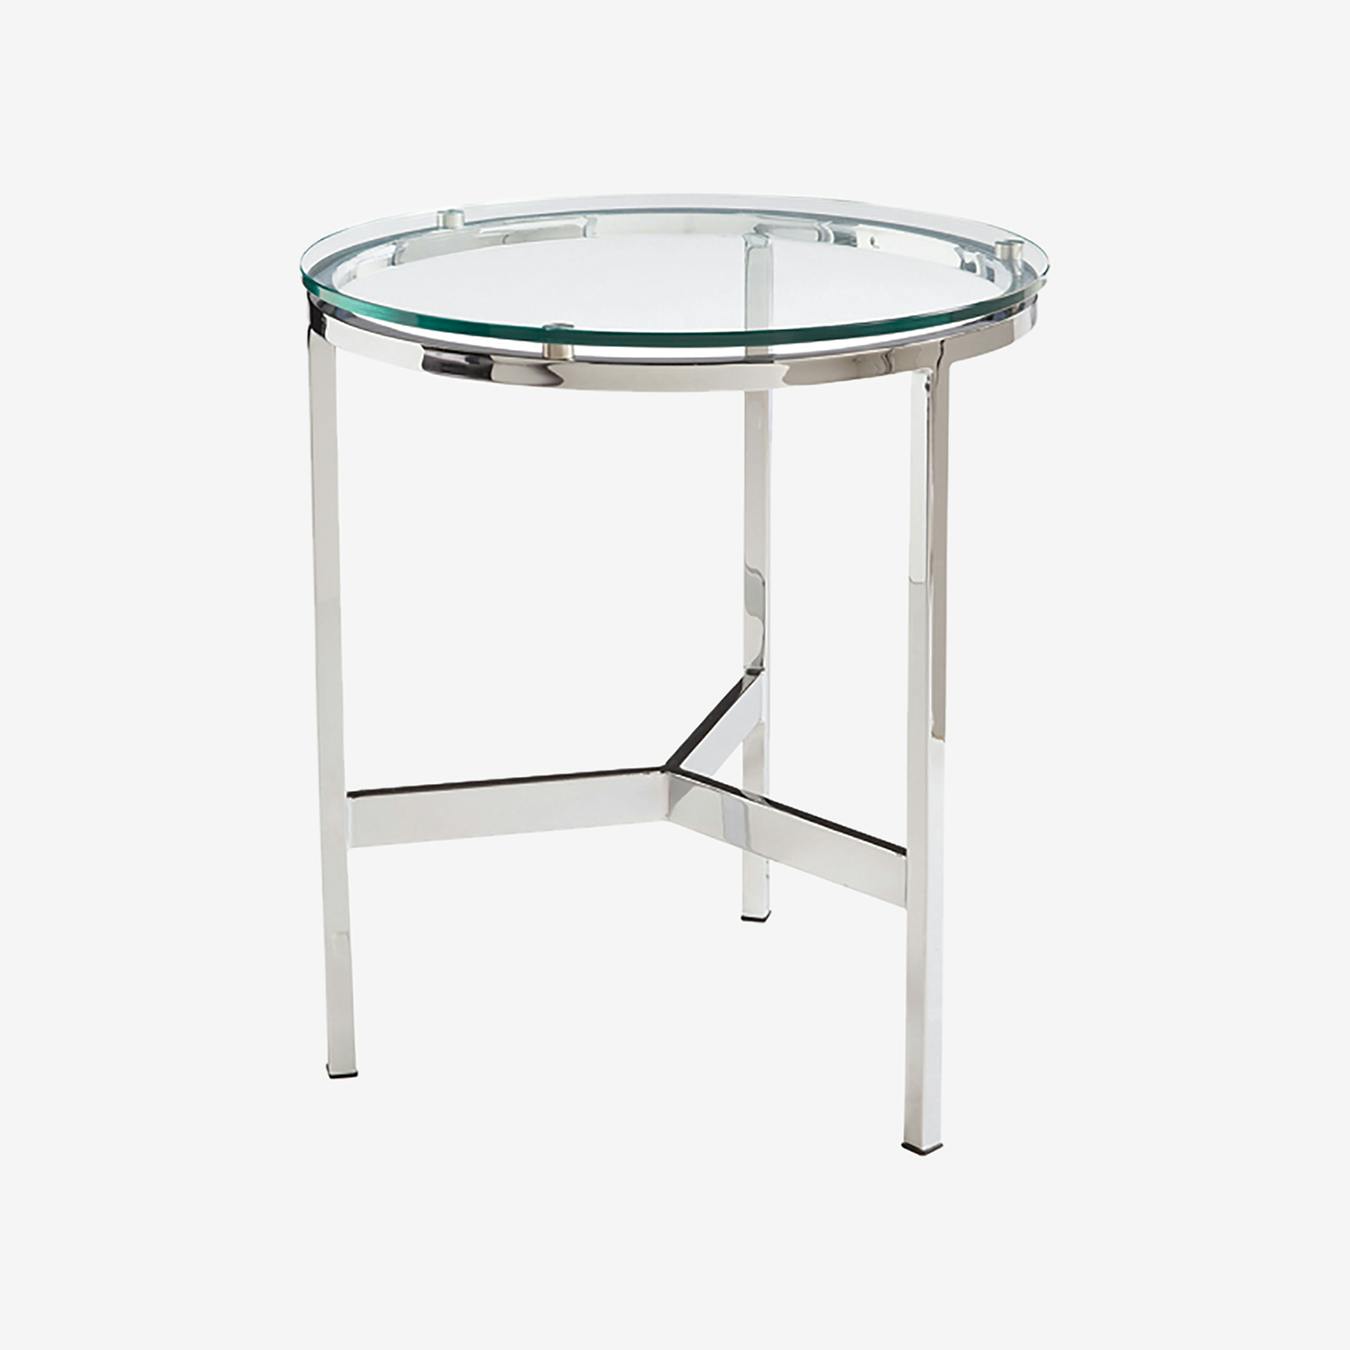 Flato End Table by Sunpan - Fy